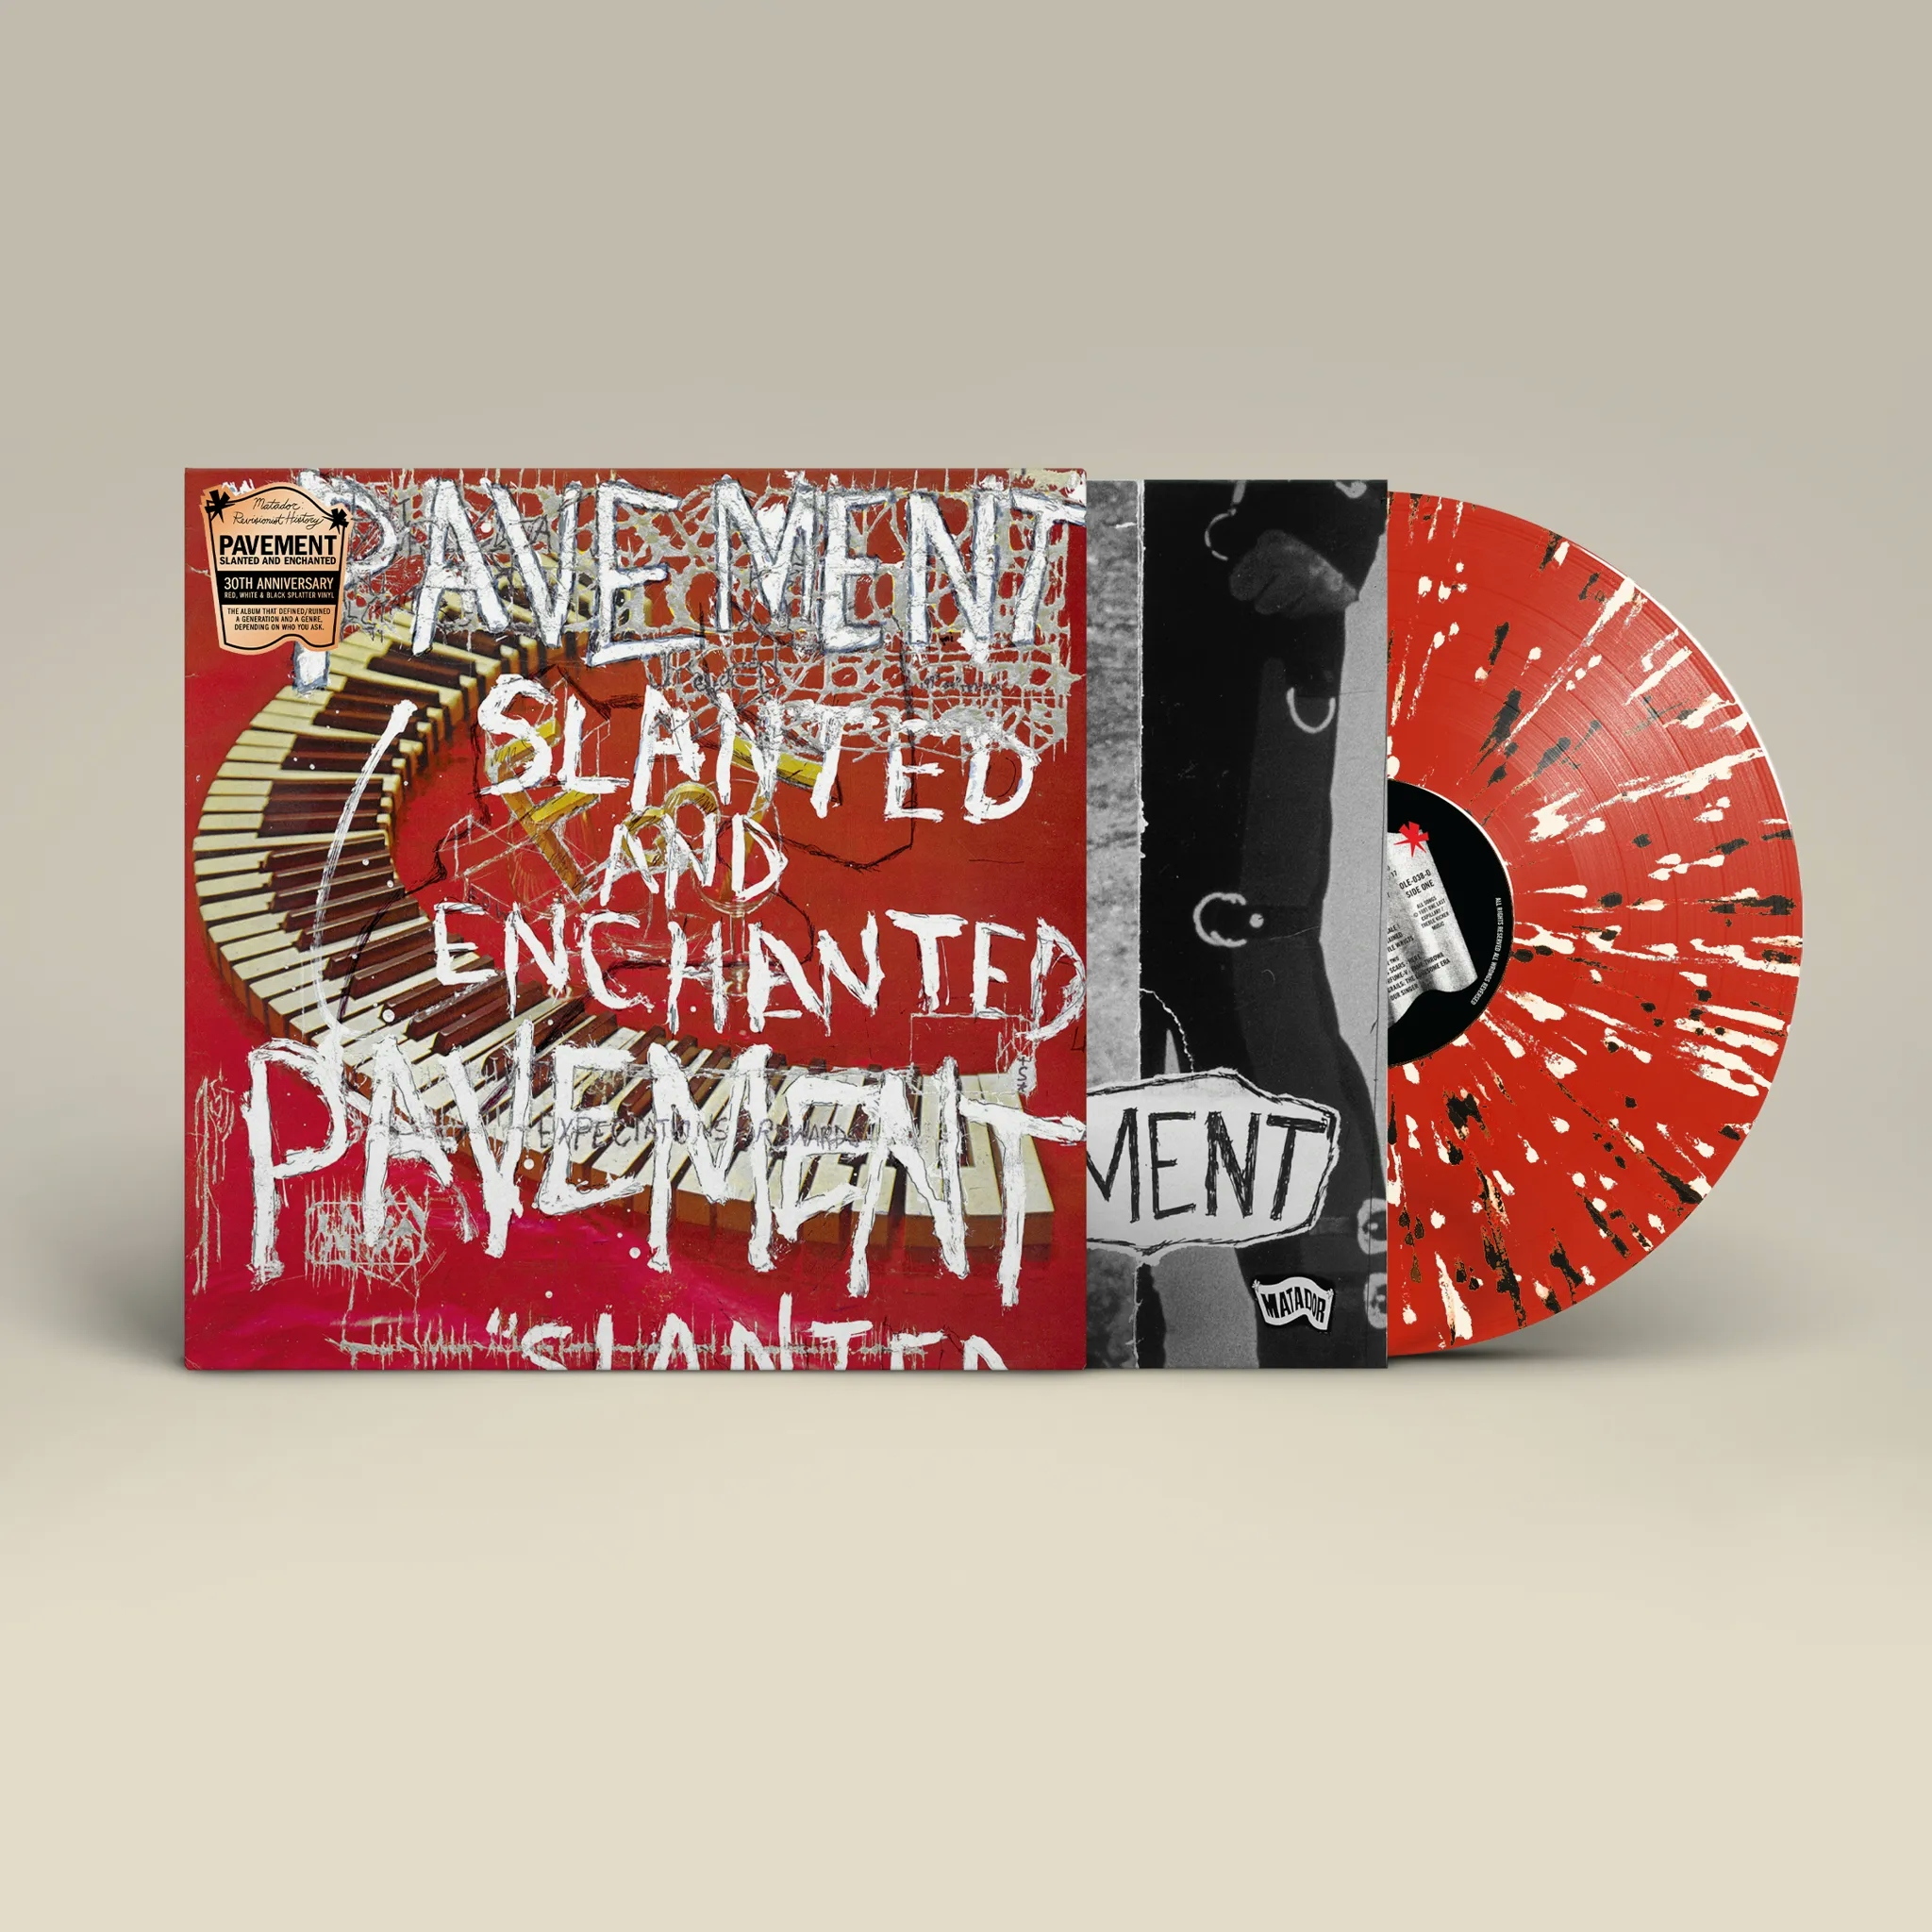 Album artwork for Slanted and Enchanted - 30th Anniversary by Pavement